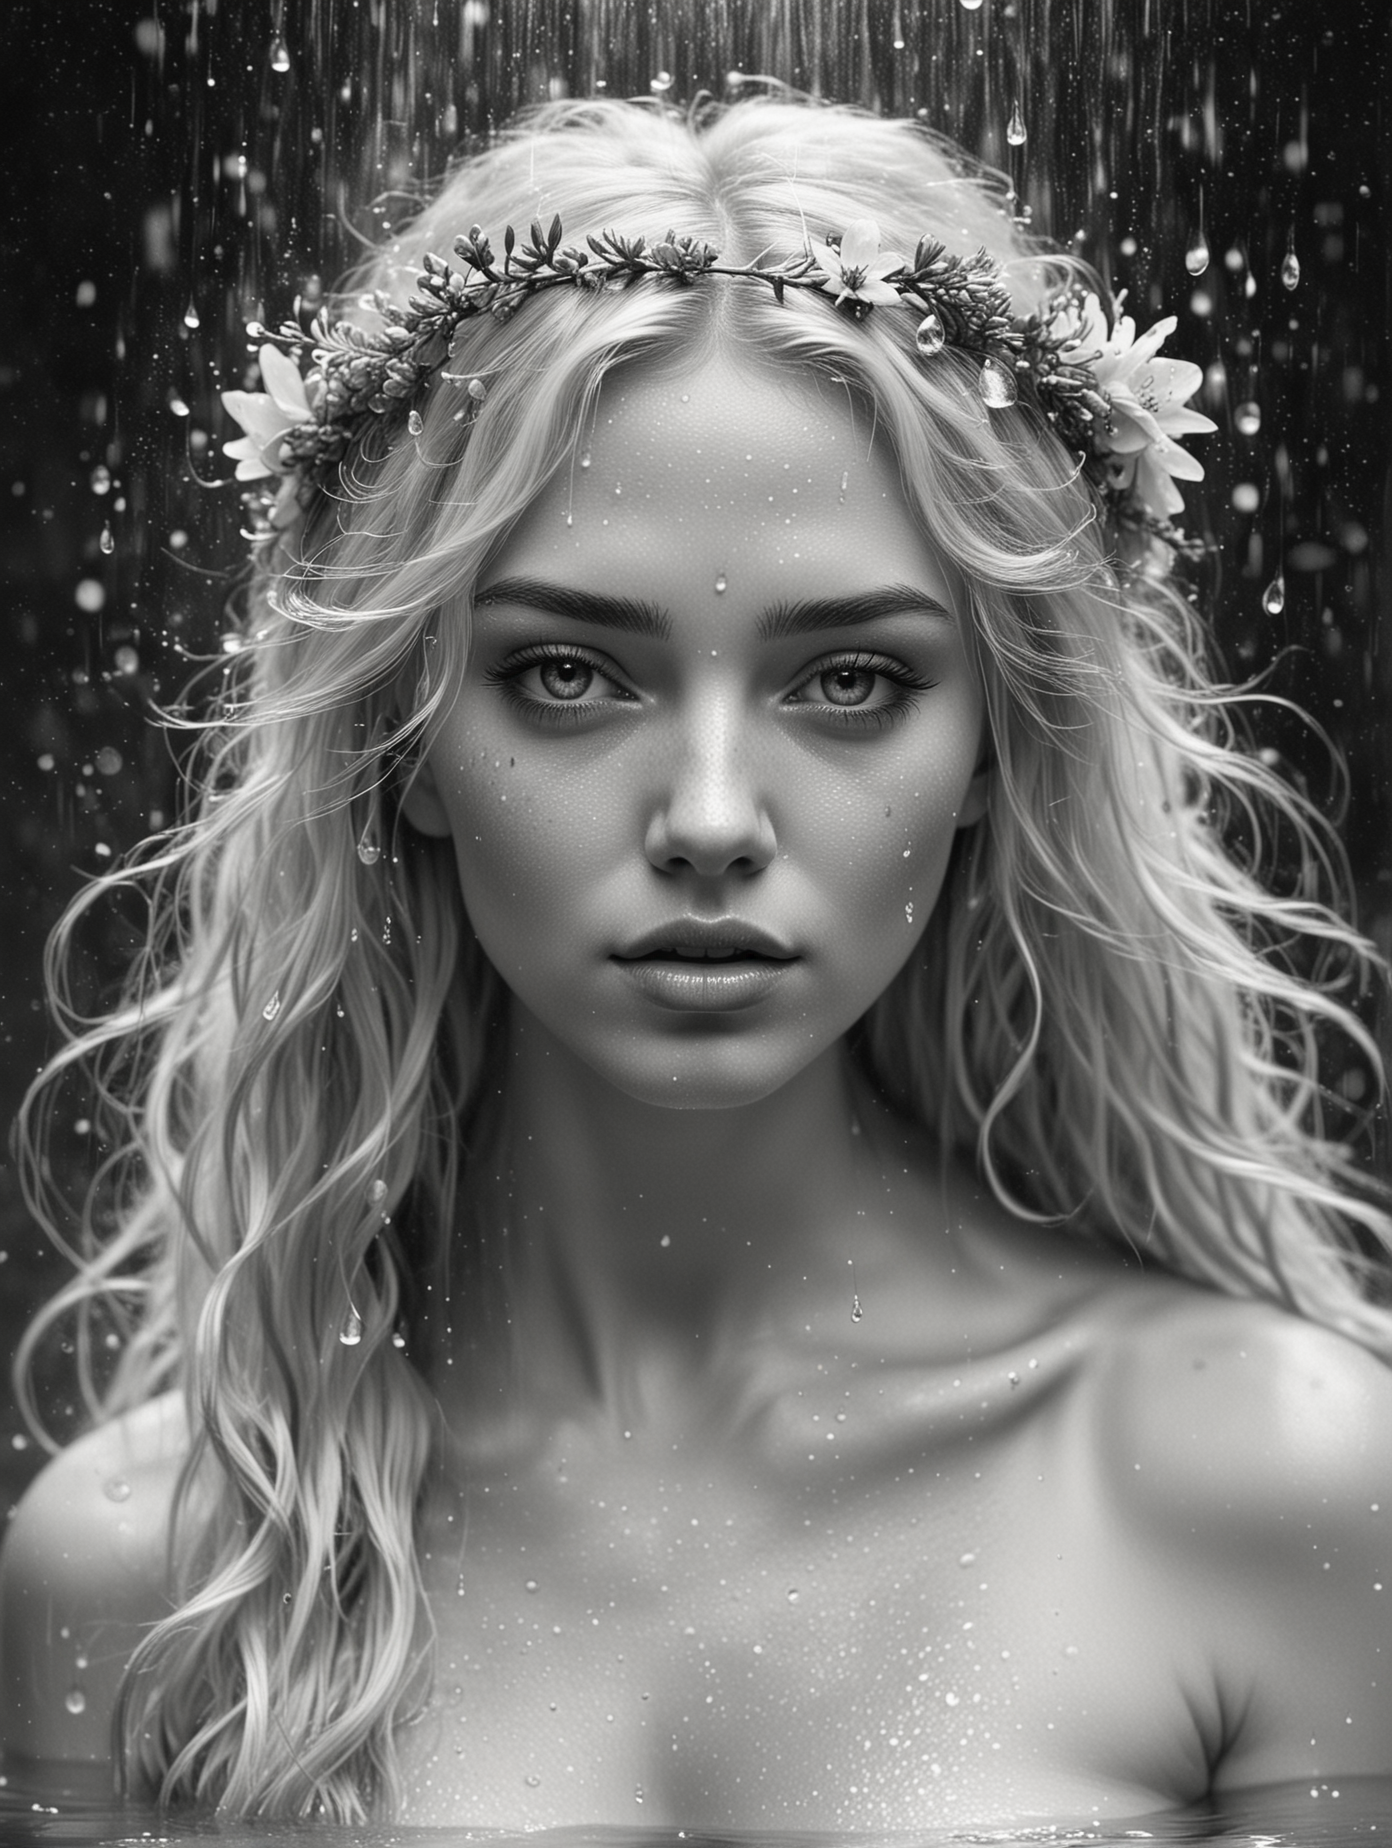 Enchanting Naiad with Flowers in Blond Hair Monochrome Portrait with Water Droplets